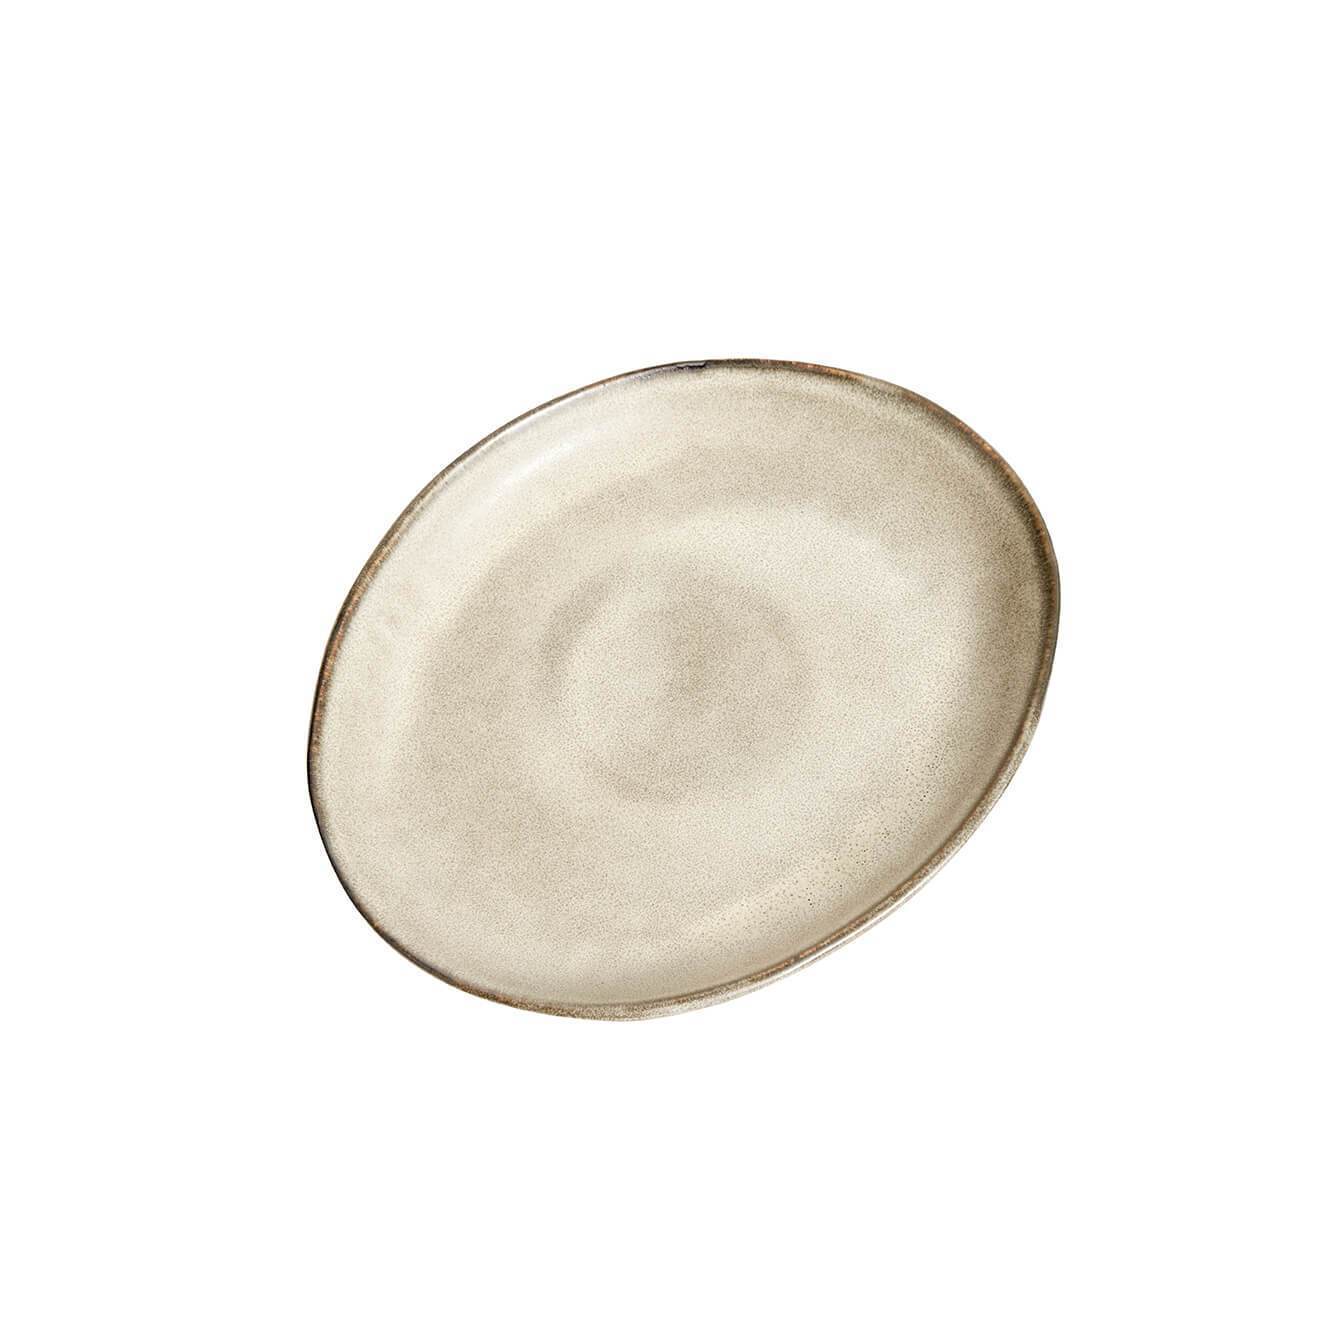 Muubs MAME CATE Plate Oyster, 17,4 cm